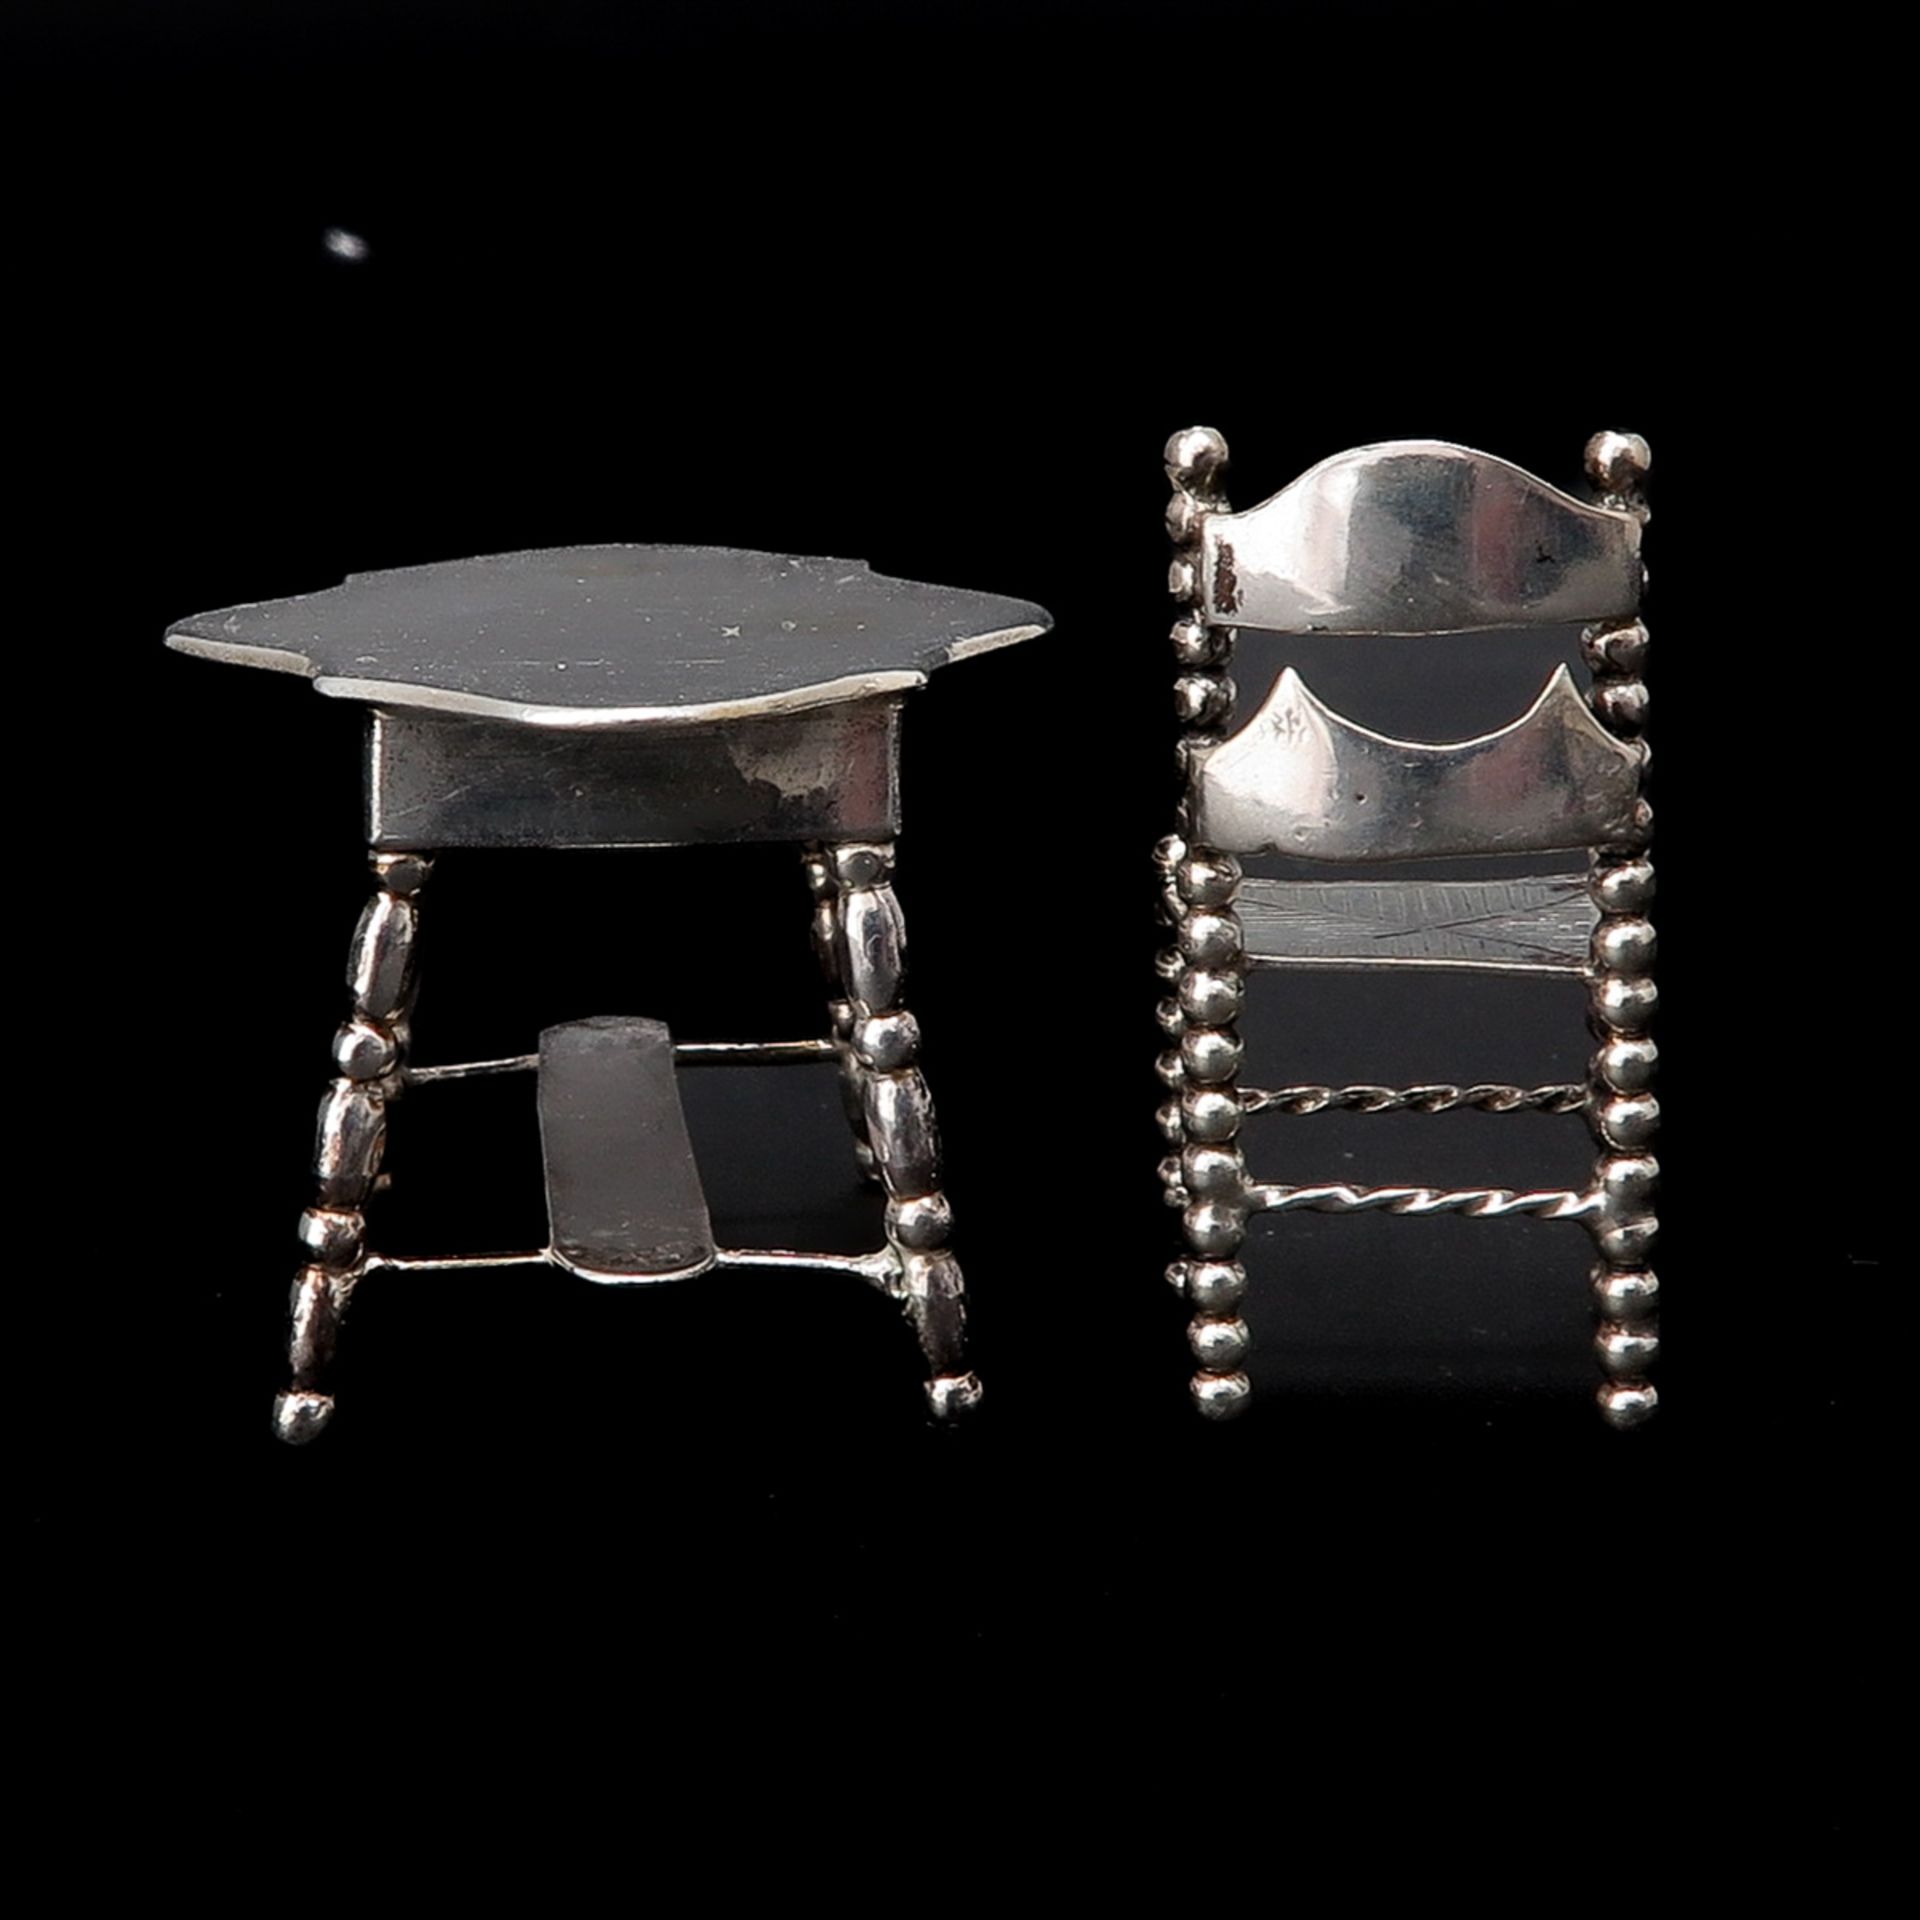 A Miniature Silver Table and Chair - Image 2 of 7